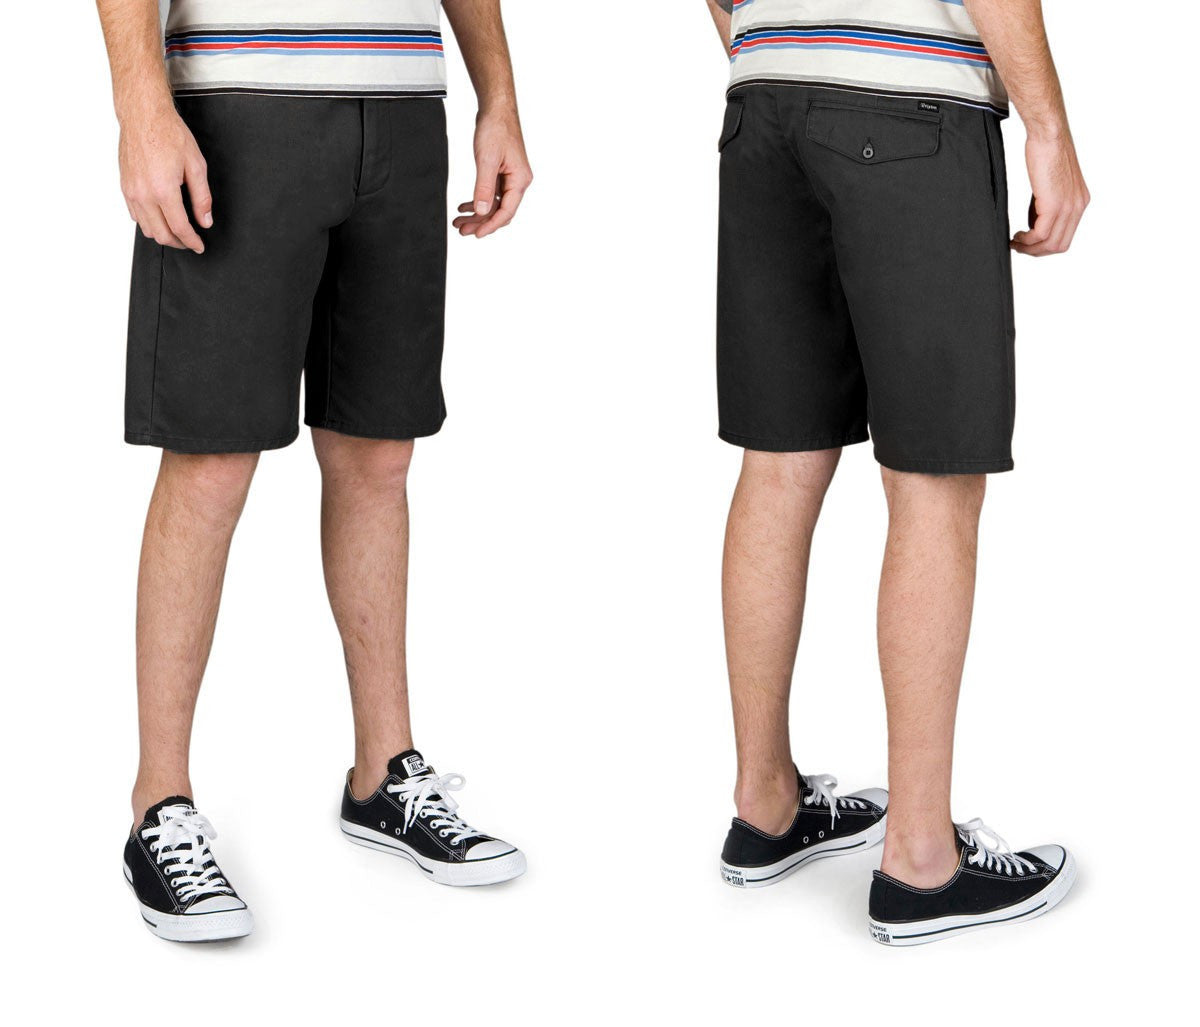 Brixton - Carter Relaxed Fit Men's Chino Shorts, Black - The Giant Peach